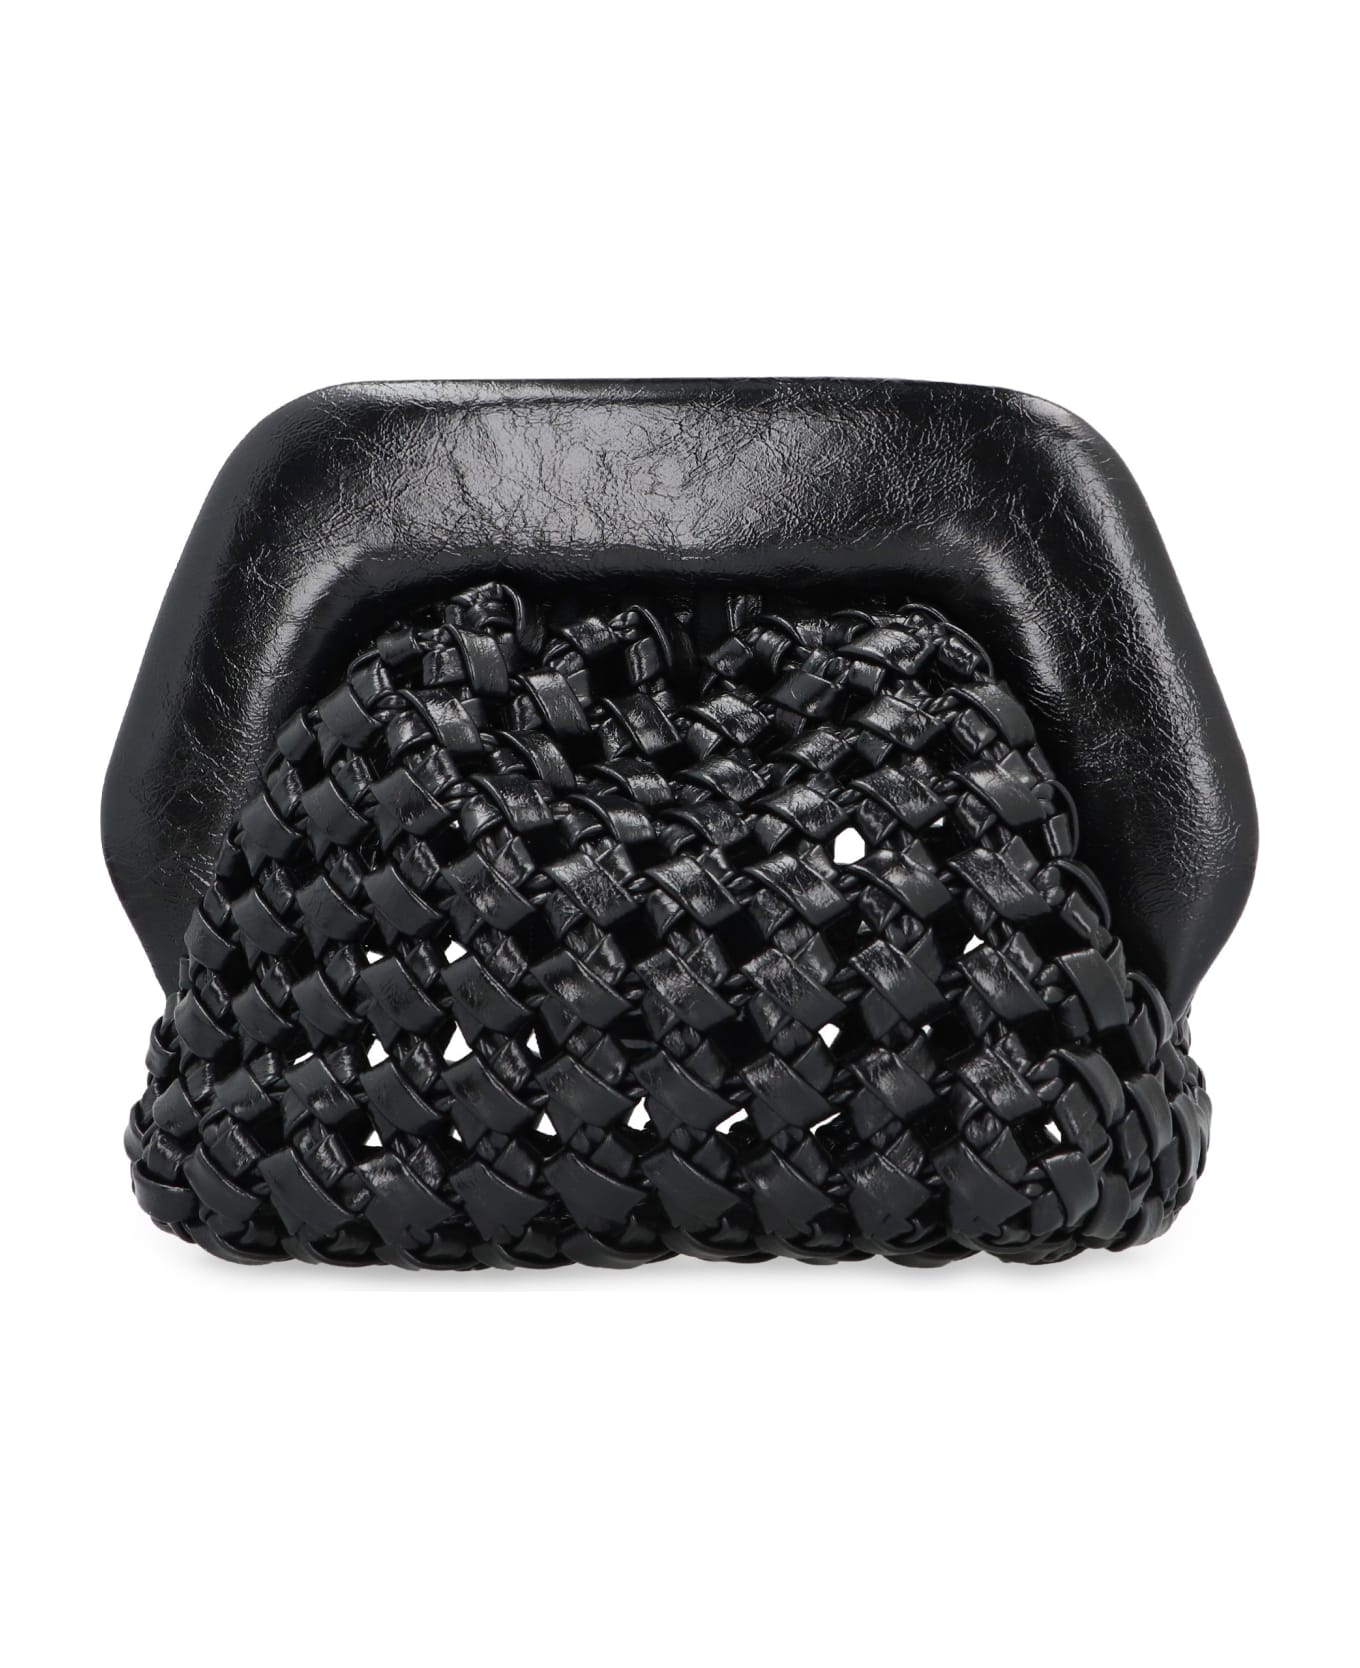 THEMOIRè Gea Knots Faux Leather Clutch - black クラッチバッグ